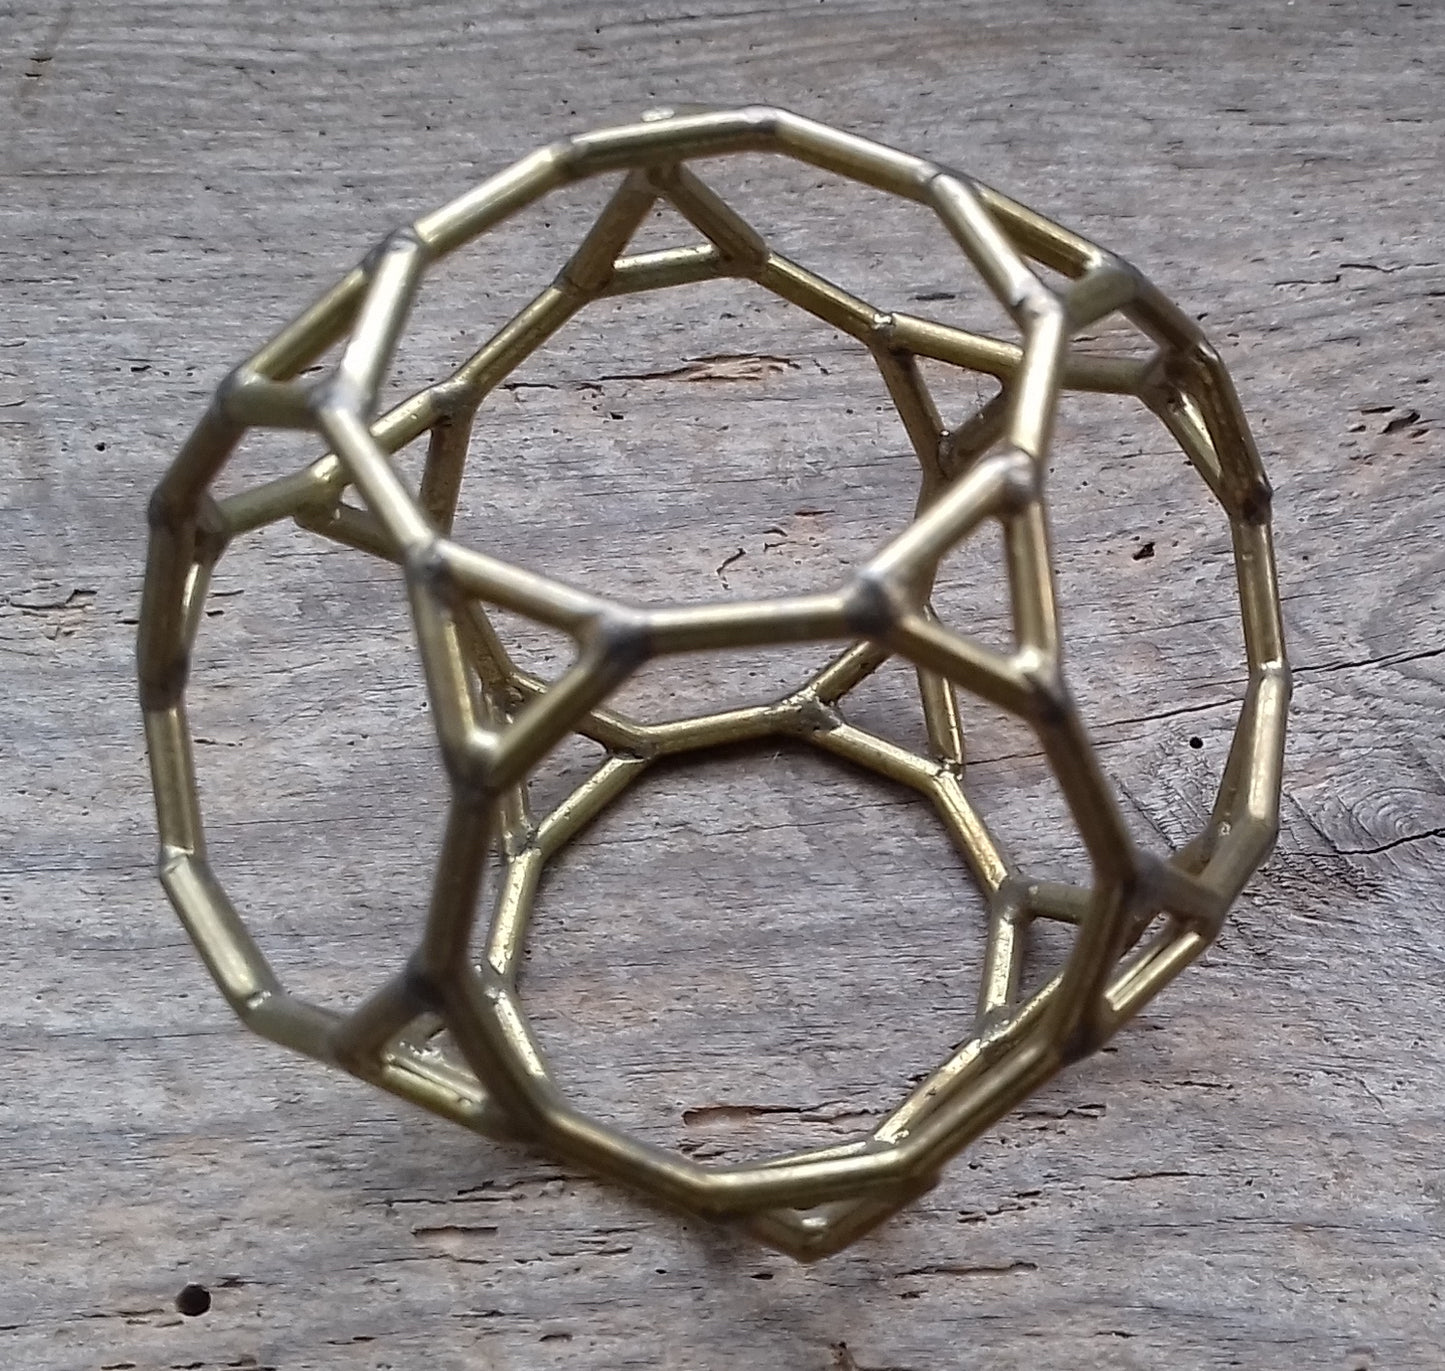 Ref.SZ0060 - Iconic Solar Sphere / Truncated Dodecahedron